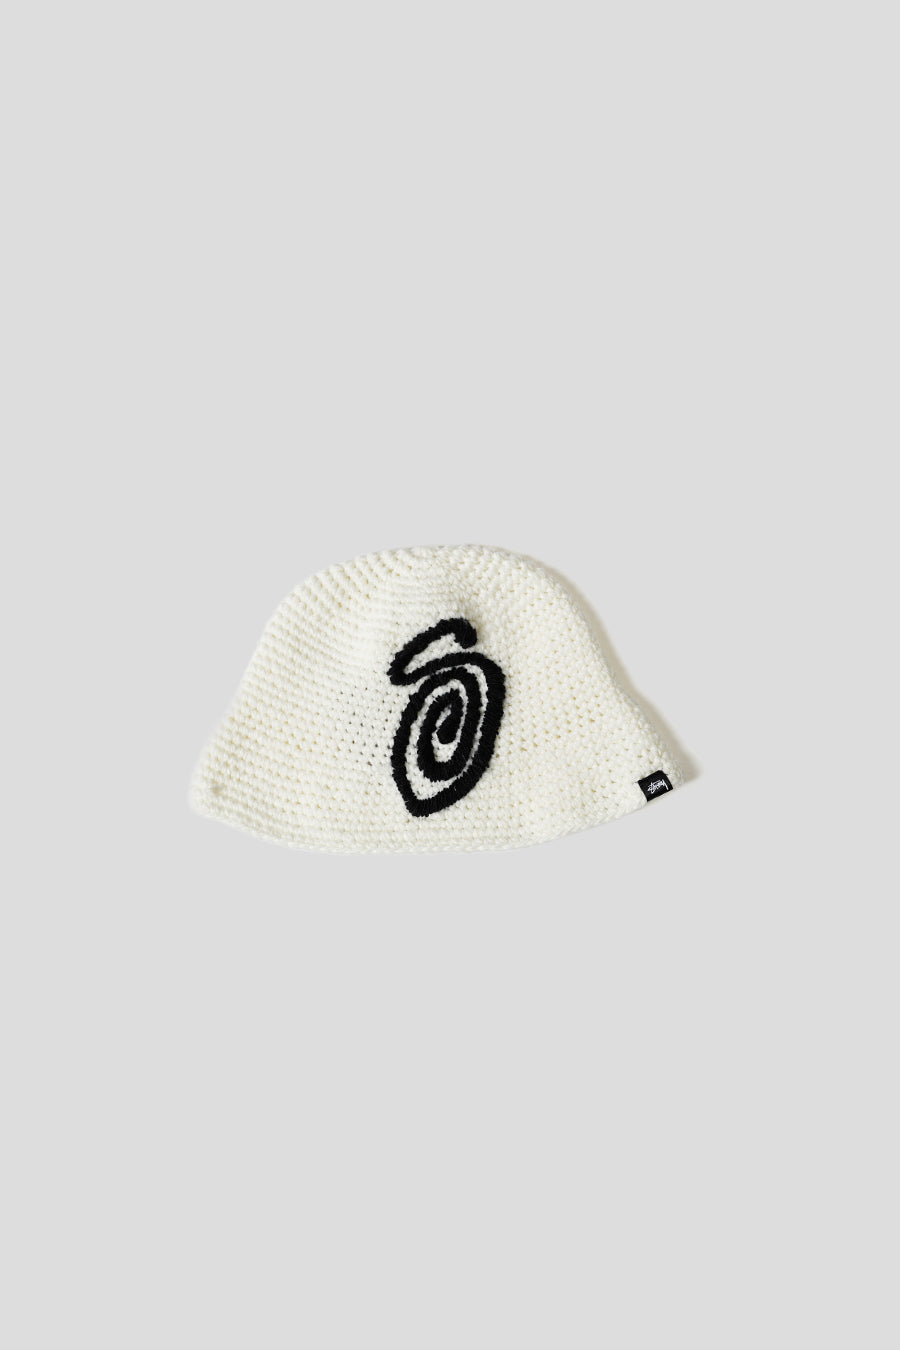 Stussy - BLACK AND WHITE SWIRLY S KNIT BUCKET HAT - LE LABO STORE